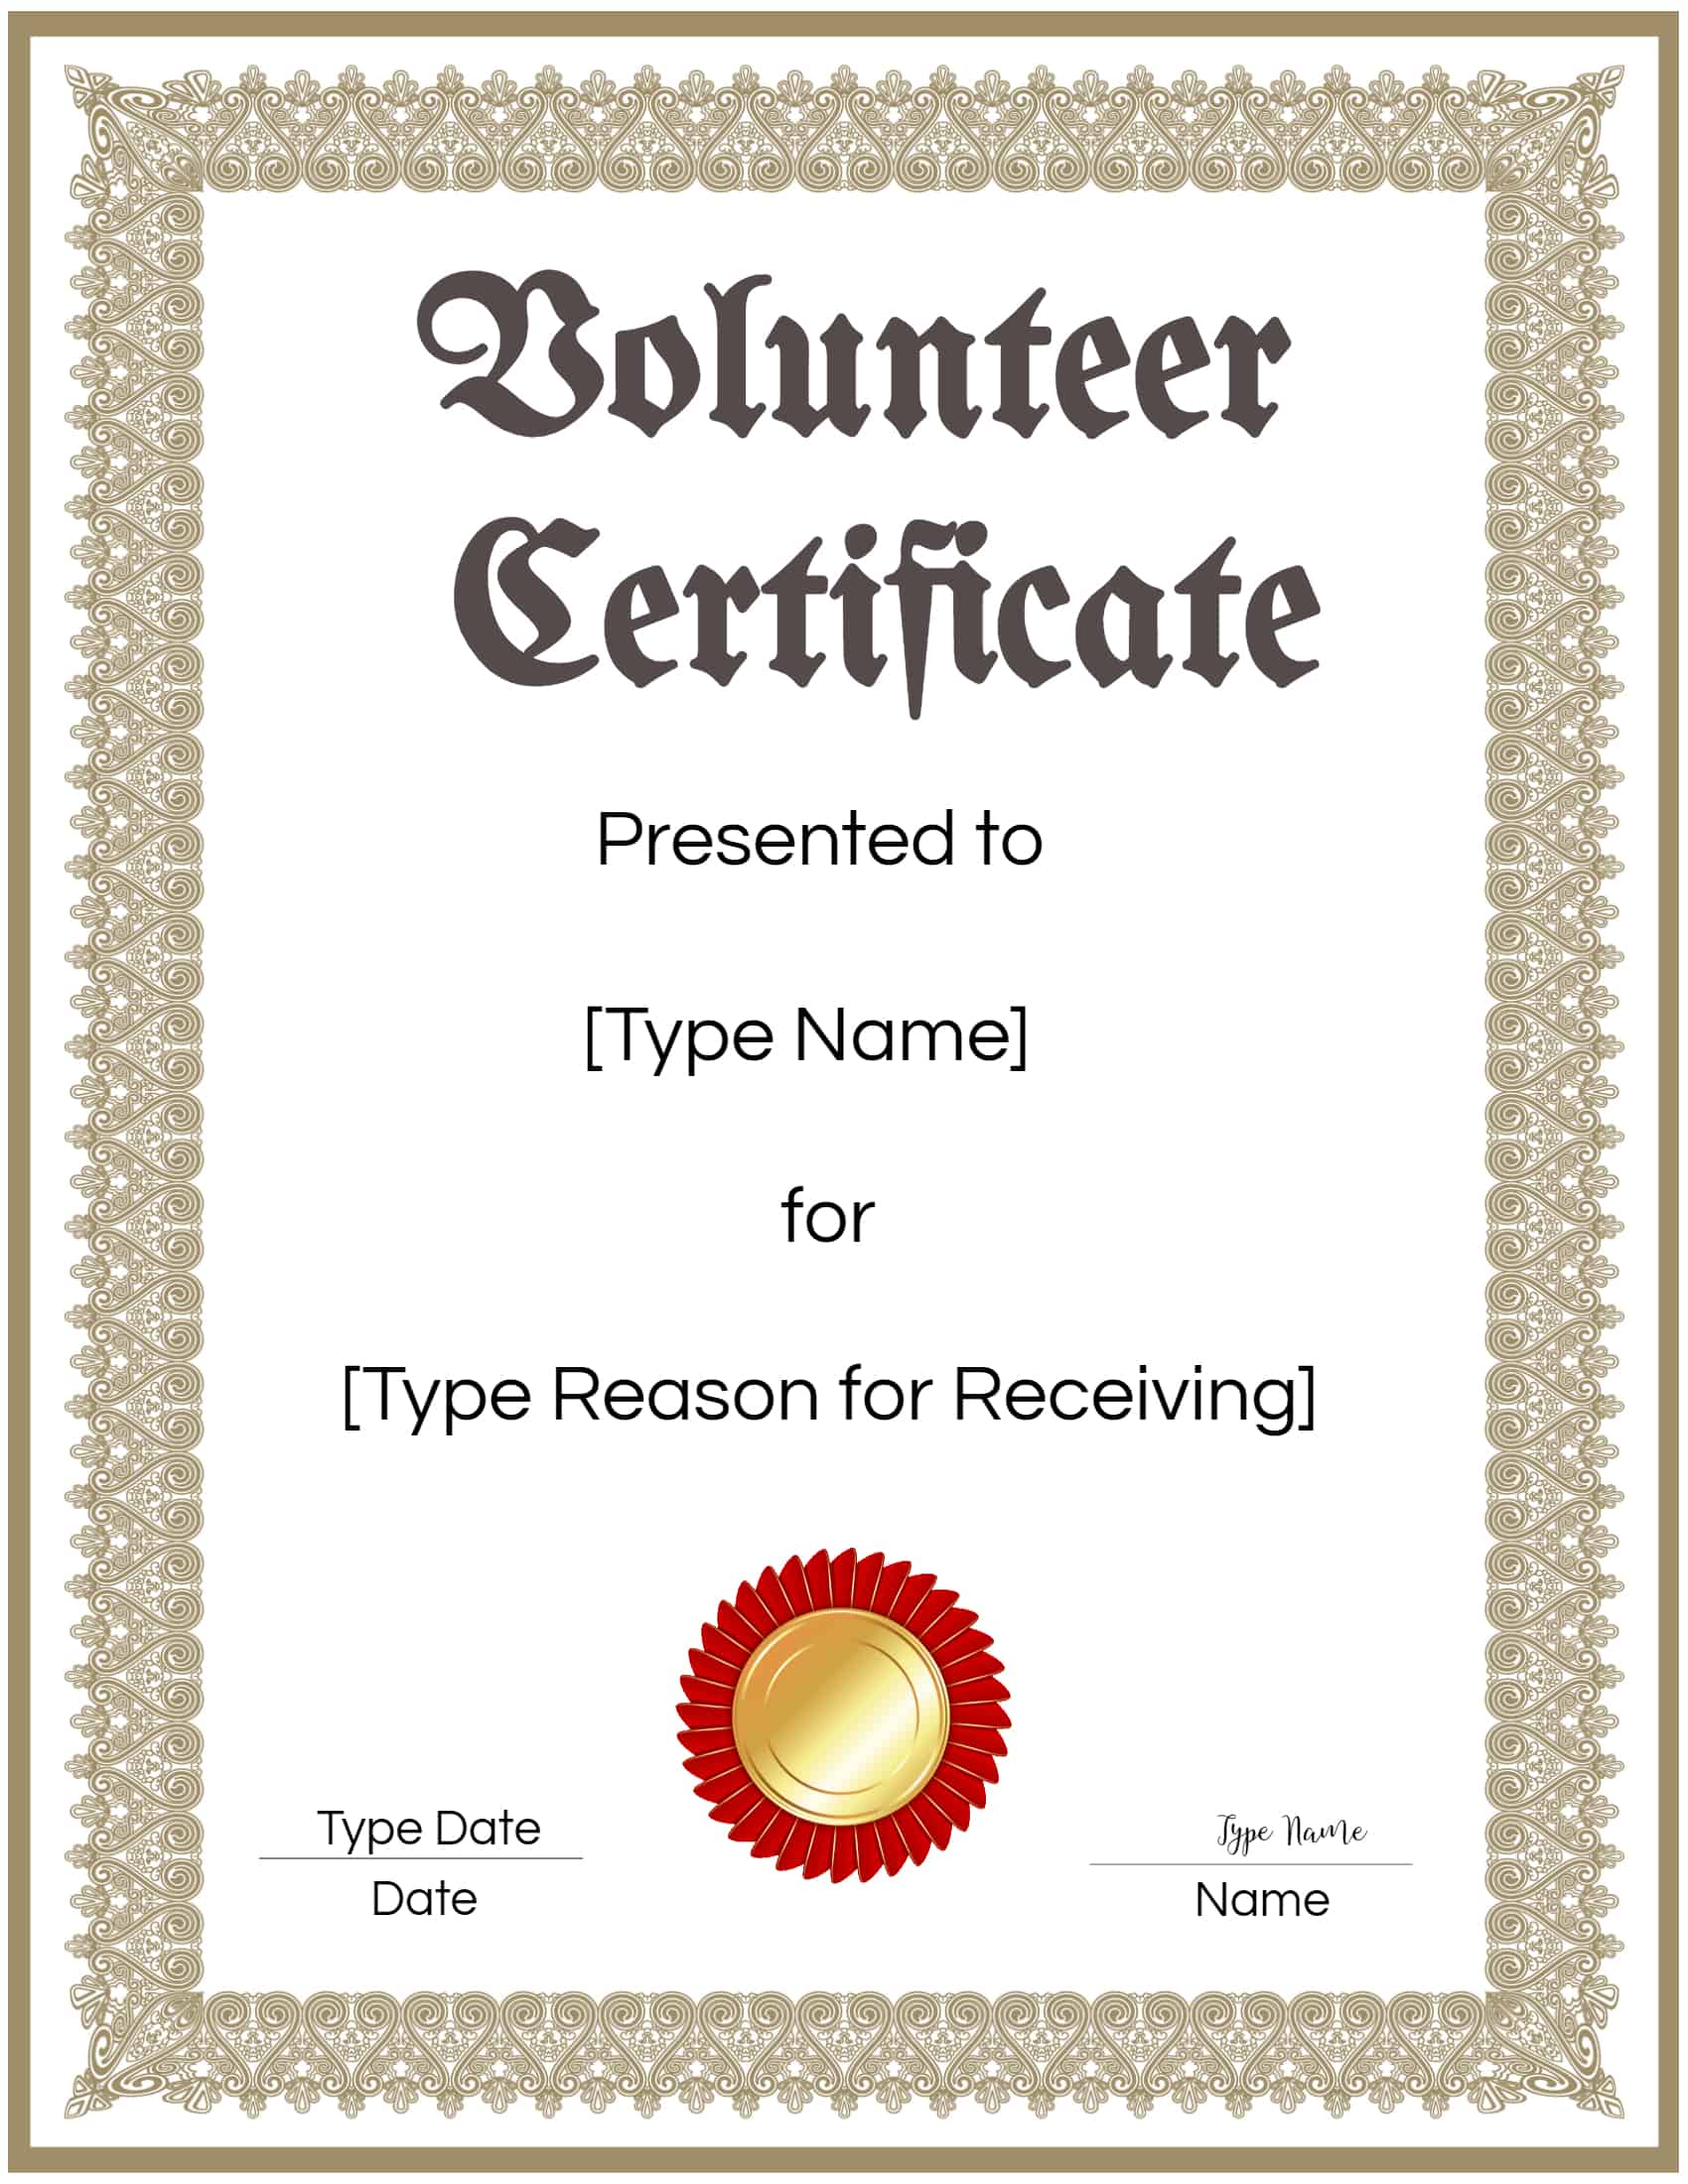 free-volunteer-certificate-template-many-designs-are-available